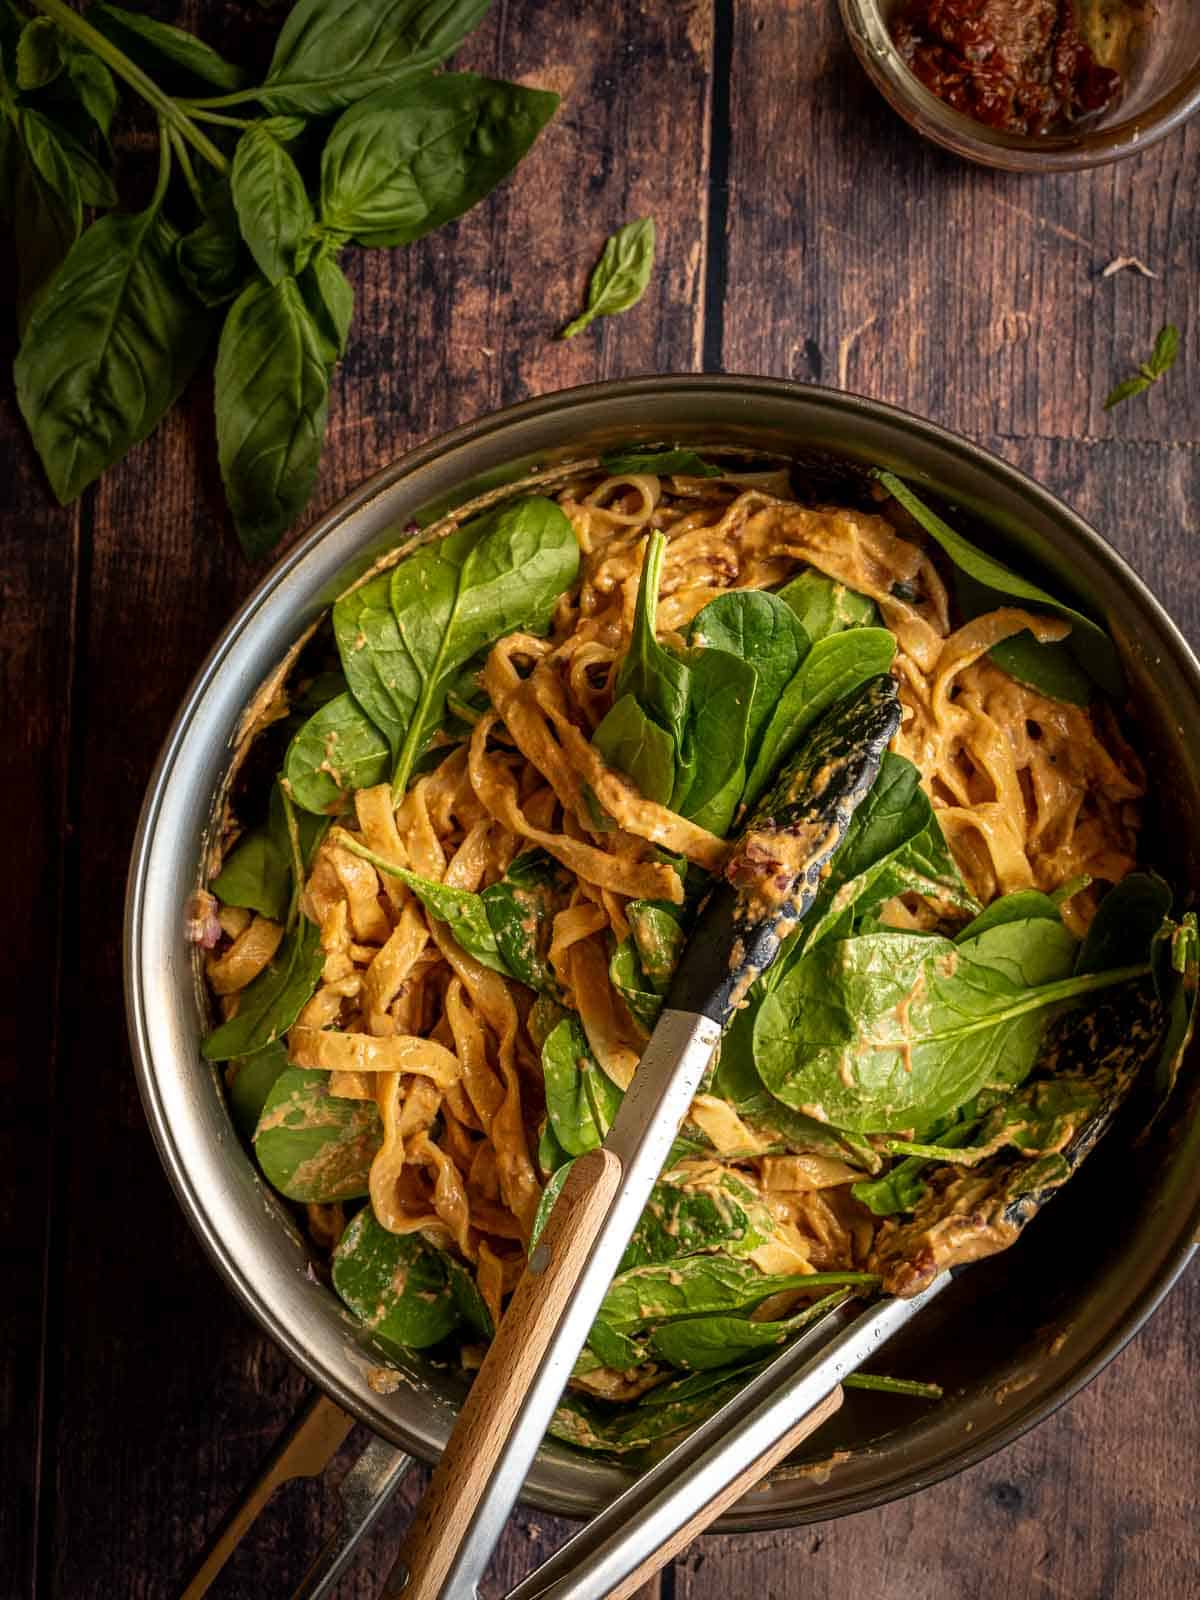 Folding Spinach fettuccine pasta in a skillet.